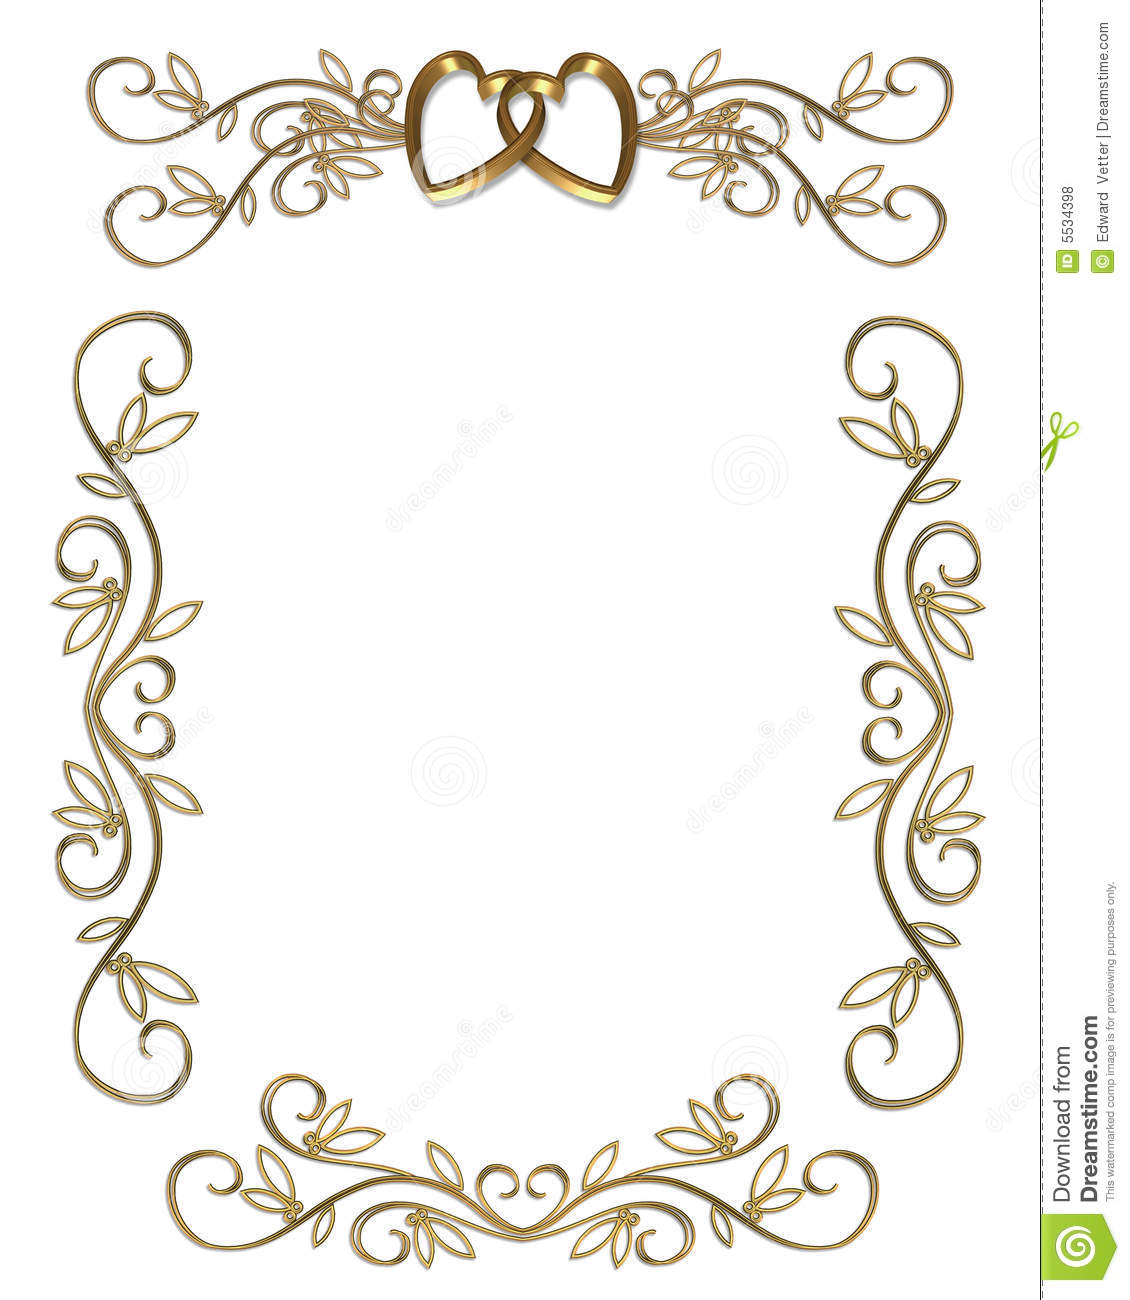 7-best-images-of-free-printable-wedding-borders-gold-gold-wedding